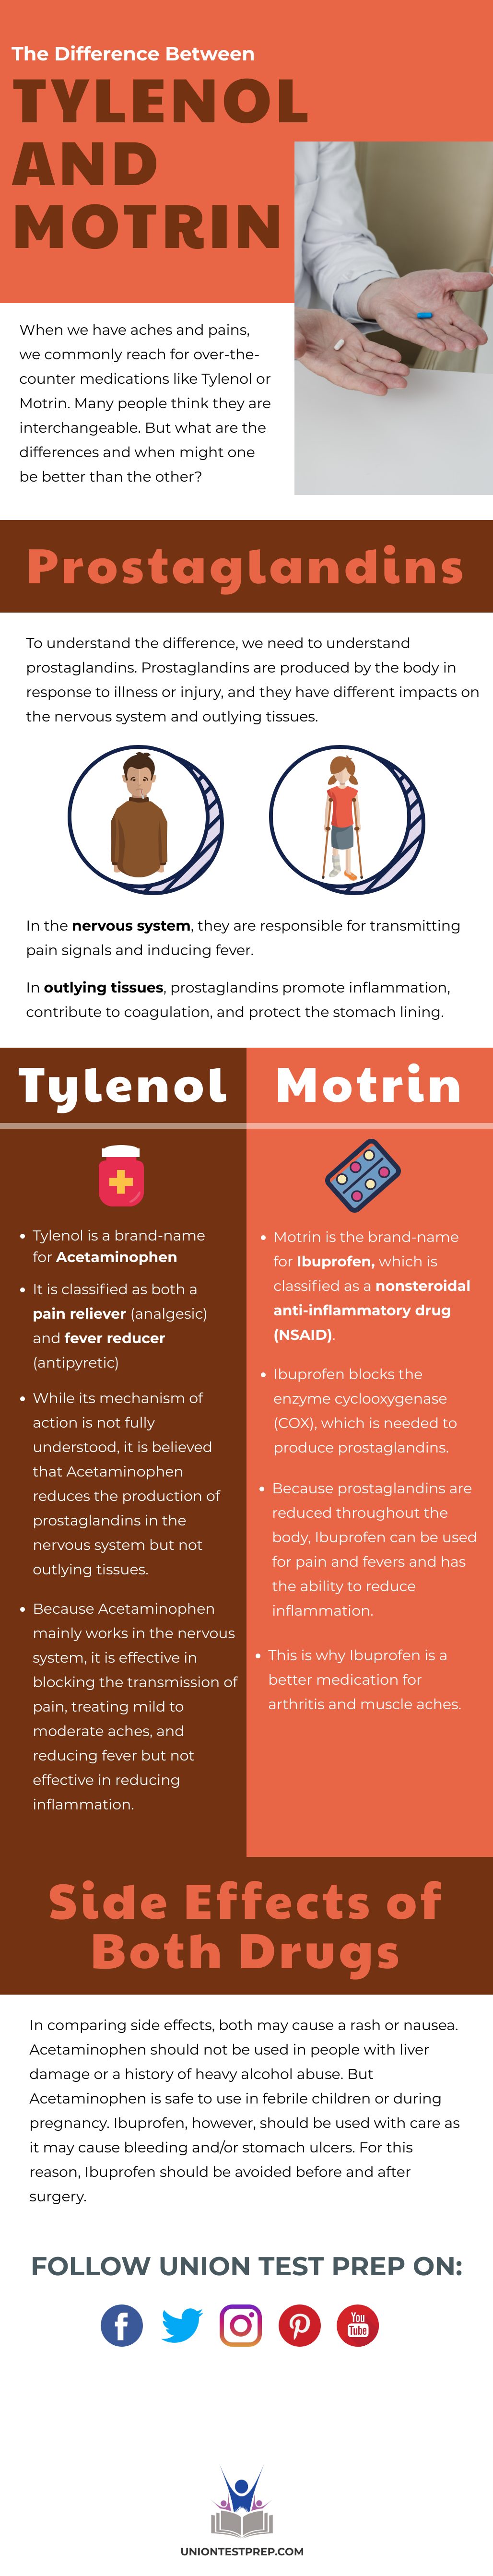 The Difference Between Tylenol and Motrin